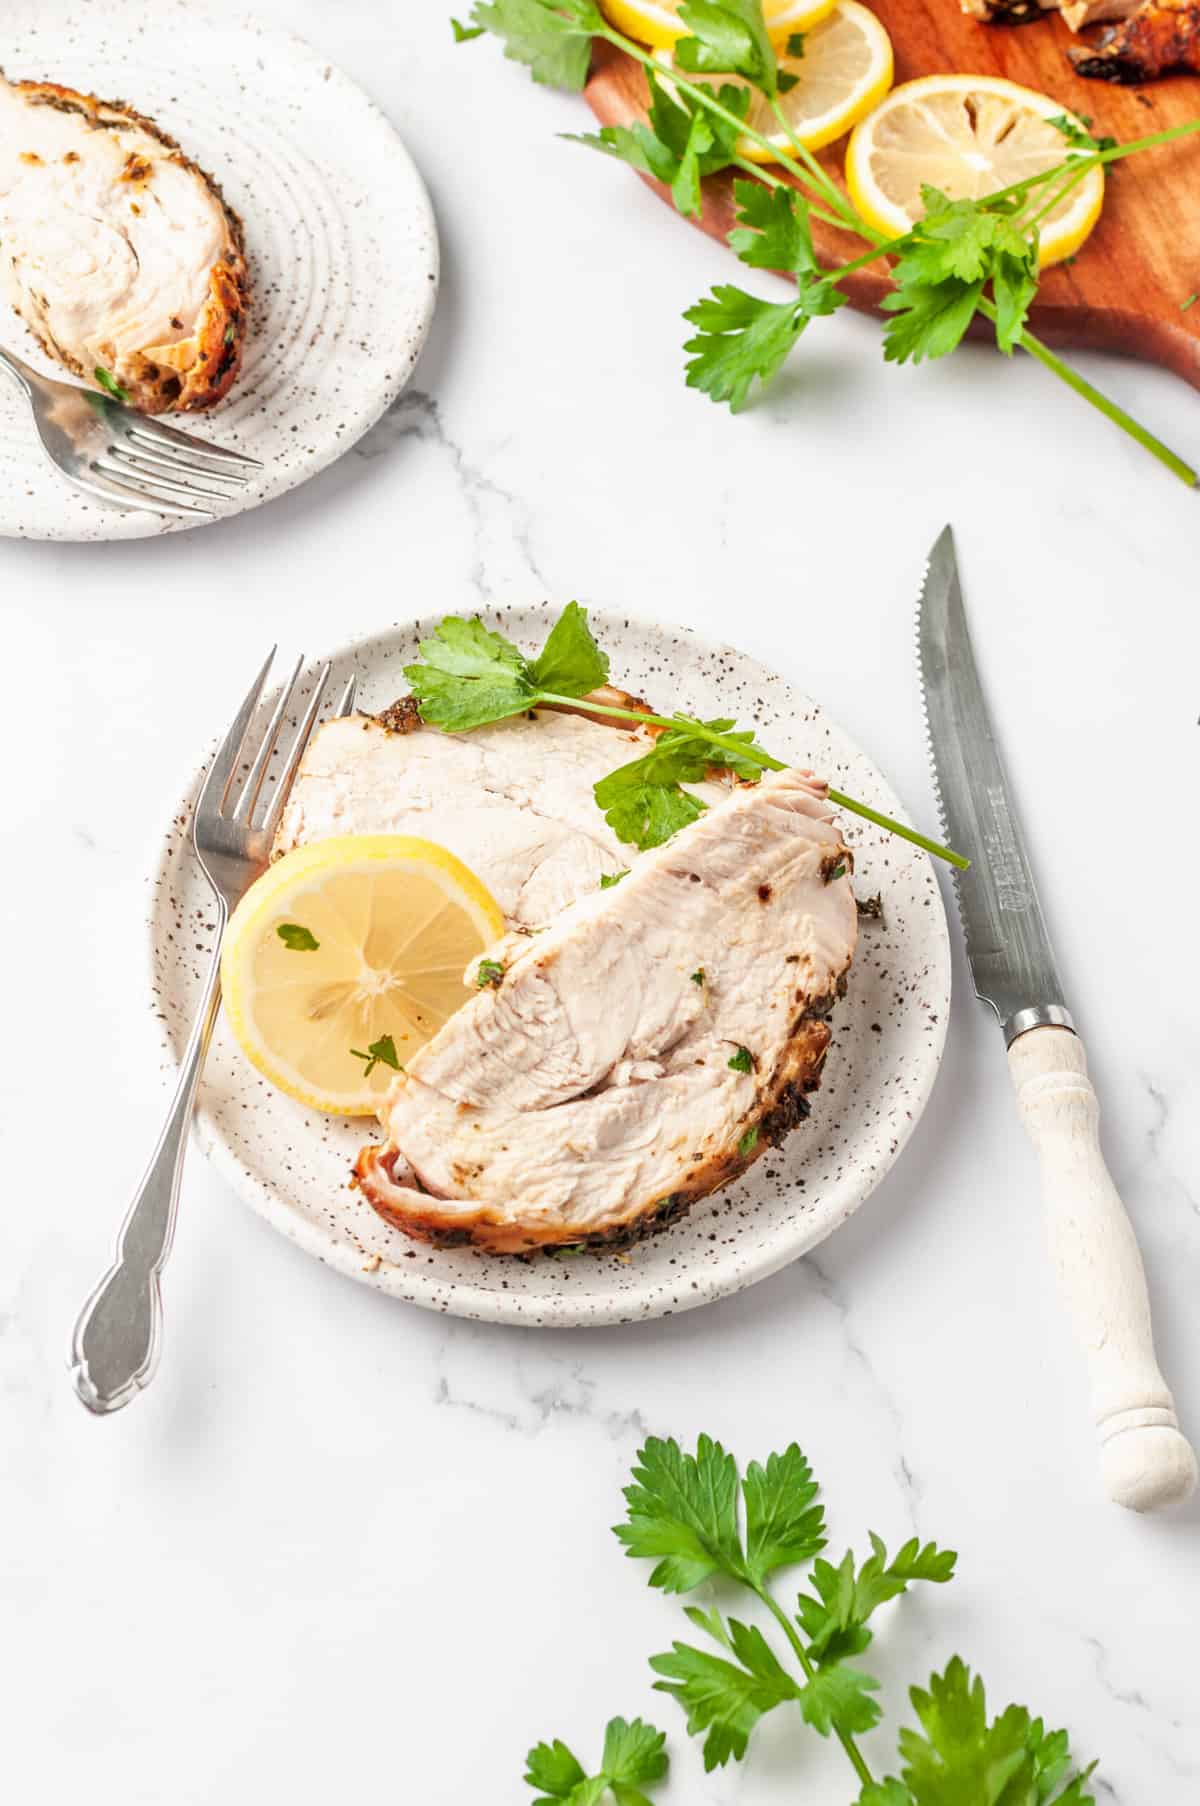 serving of air fryer turkey breast served on a speckled plate with a lemon slice and silver fork and knife